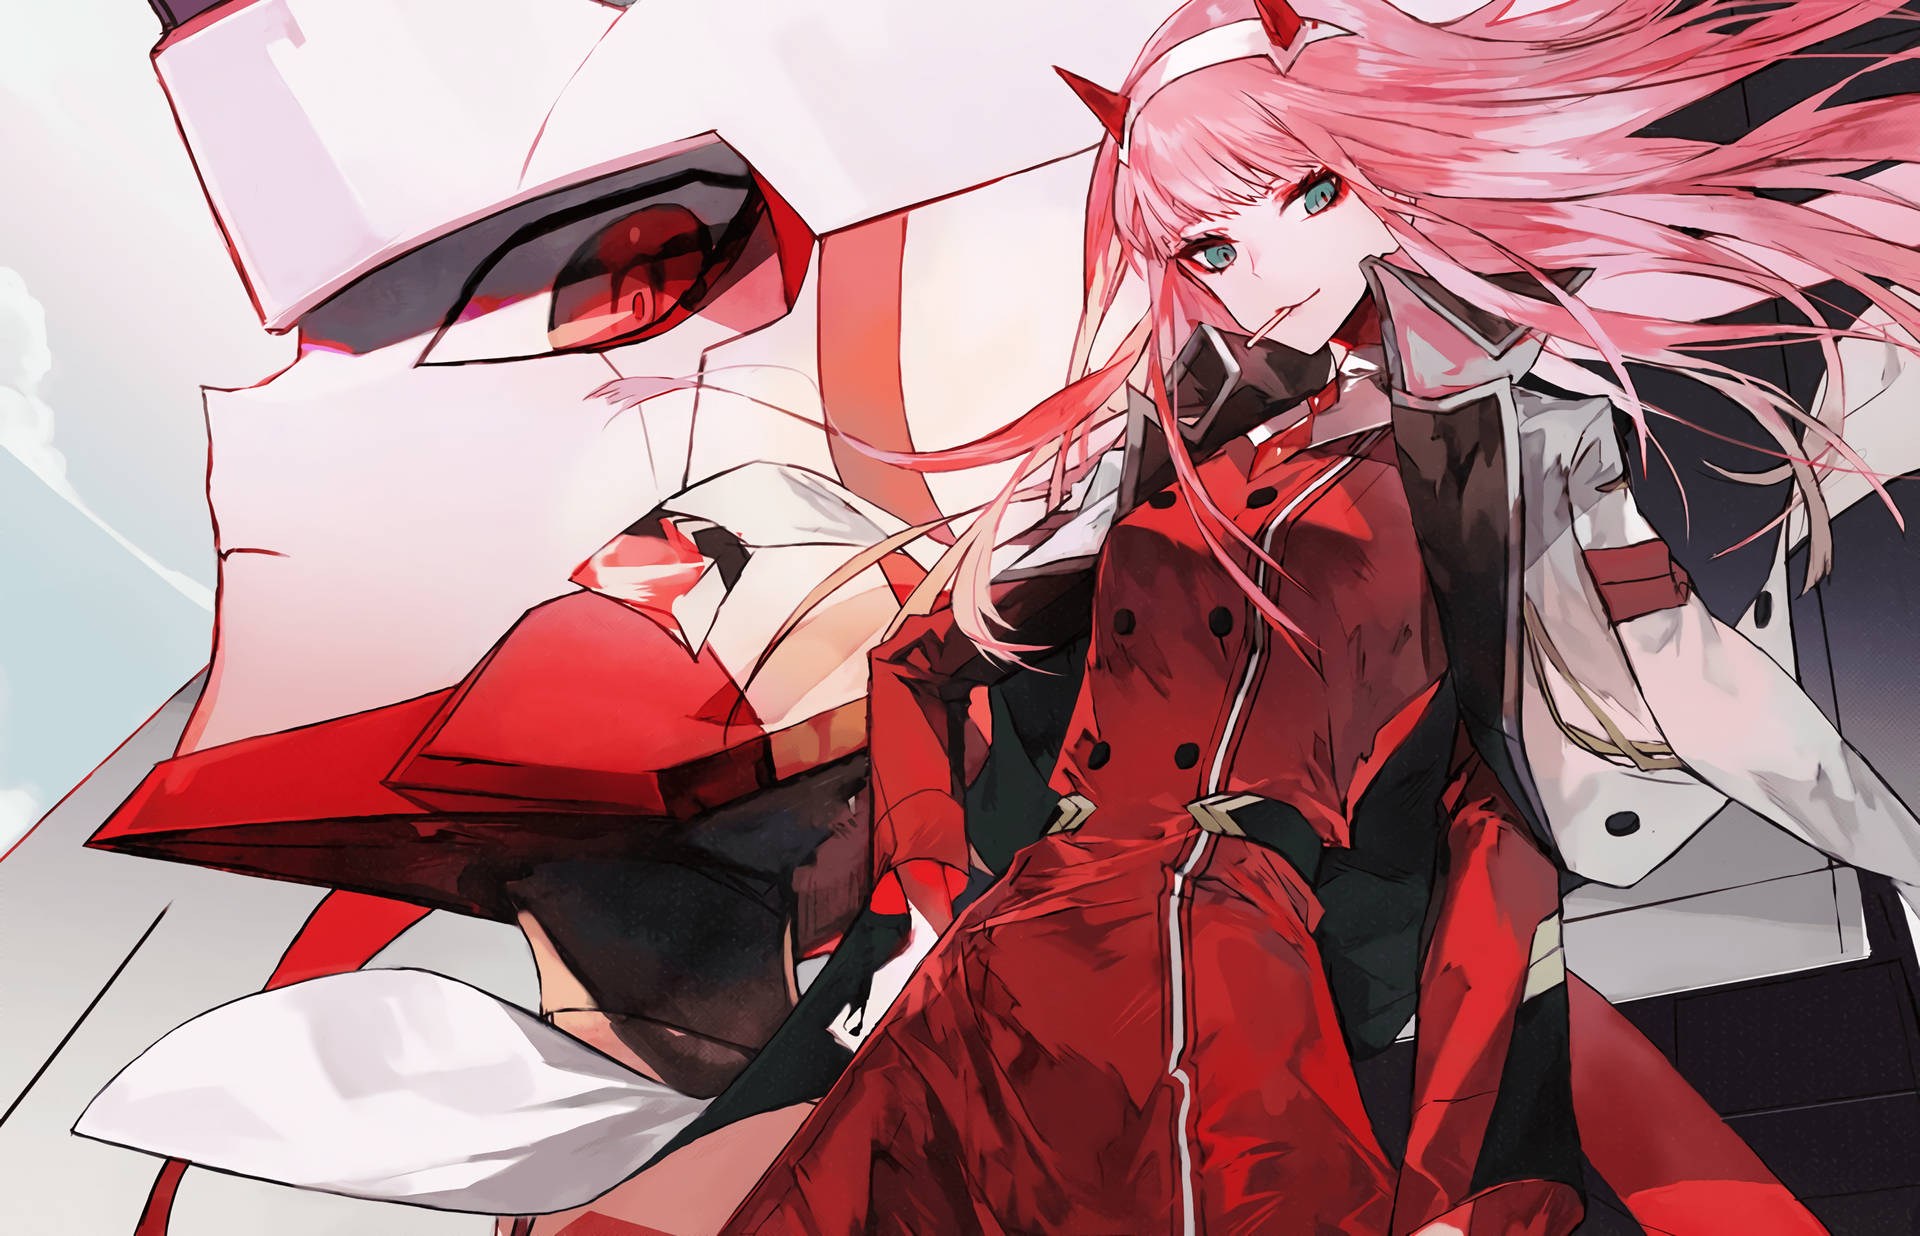 Is there going to be a second season for Darling in the Franxx? - Quora